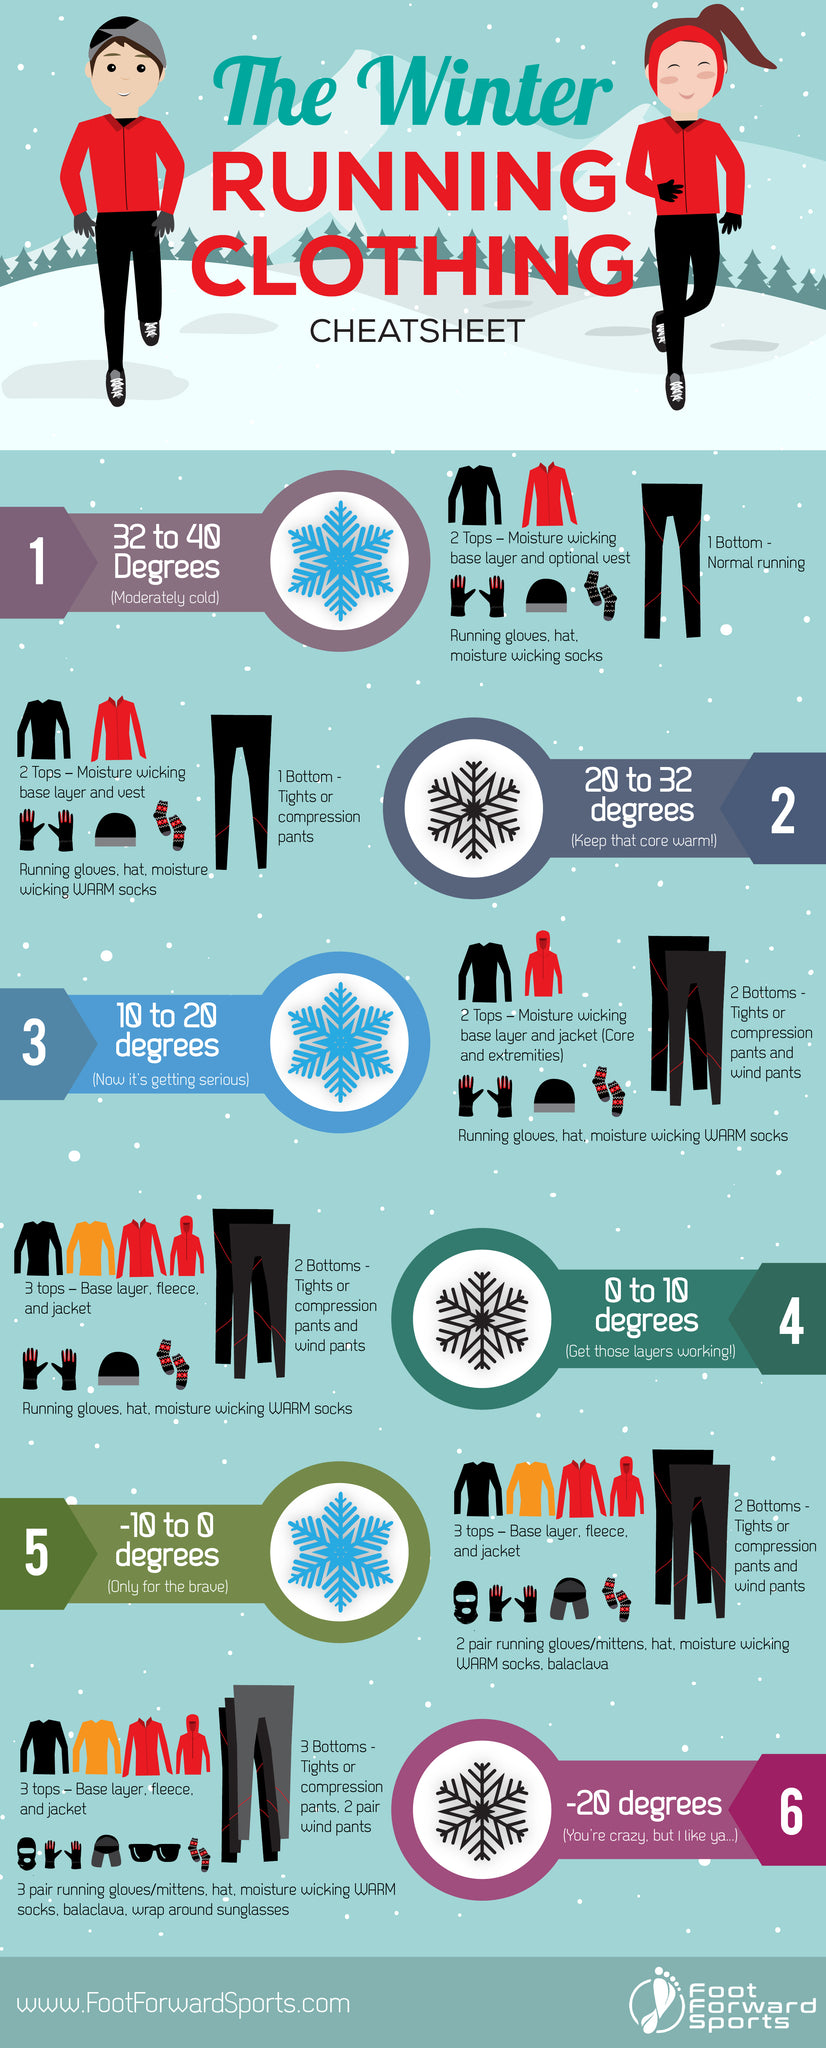 Cold Weather Running Clothing CheatSheet for Runners by Foot Forward Sports